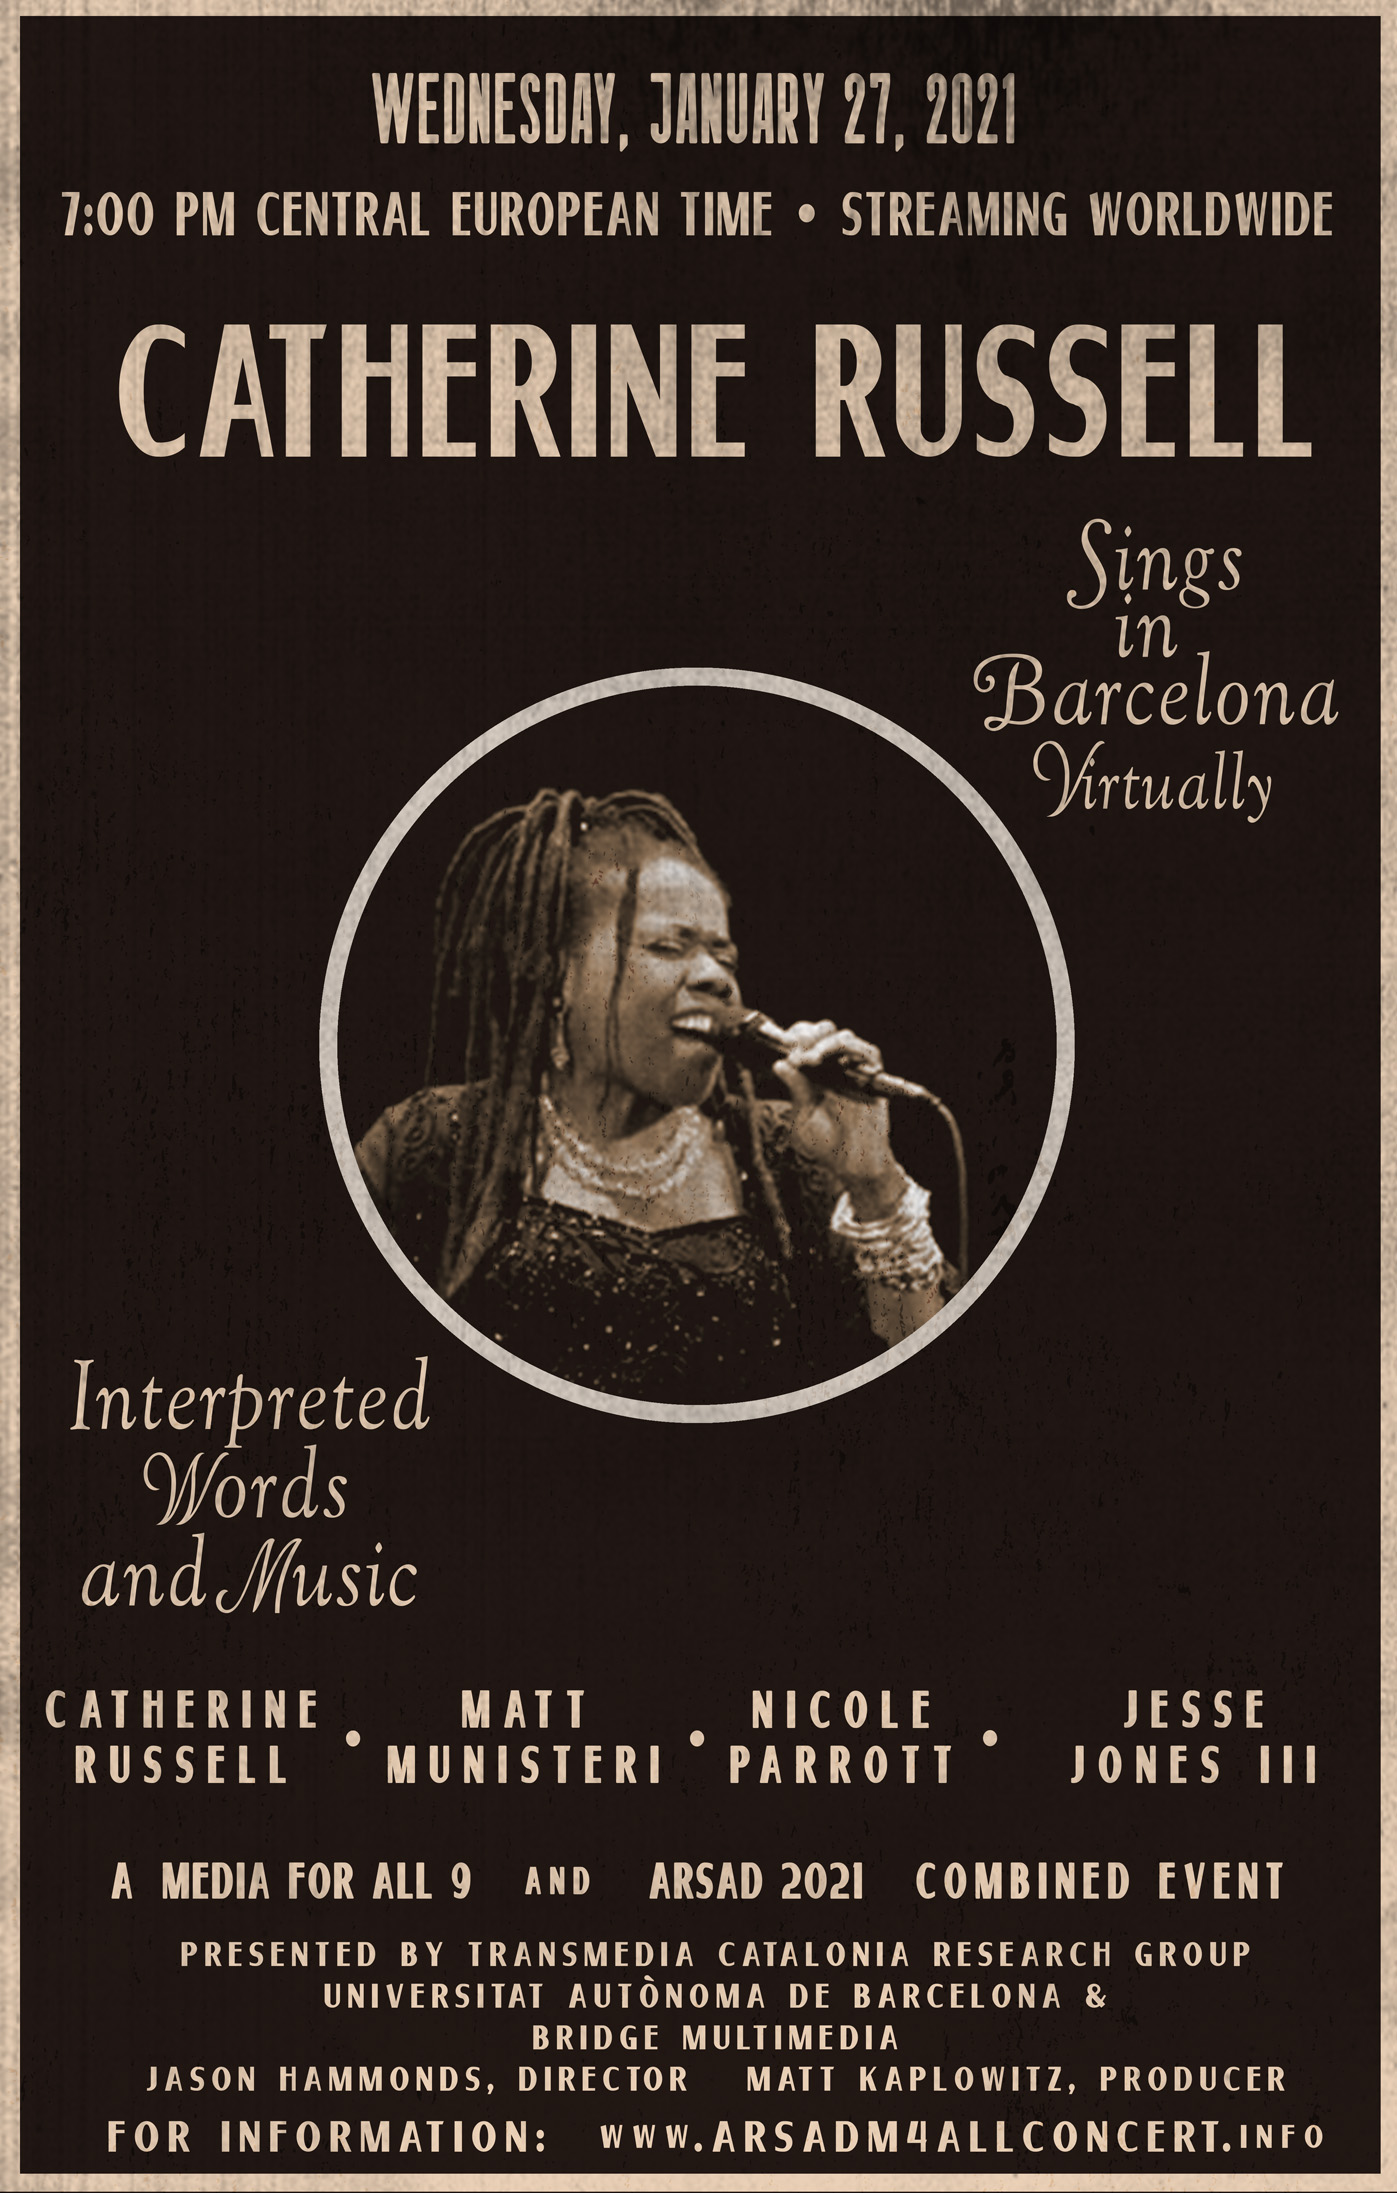 Wednesday 27 January 2021, 7 PM Central European Time, Catherine Russell sings in Barcelona virtually.  Streaming worldwide. A Media for All 9 and ARSAD 2021 combined event.  For information: www.arsadm4allconcert.info